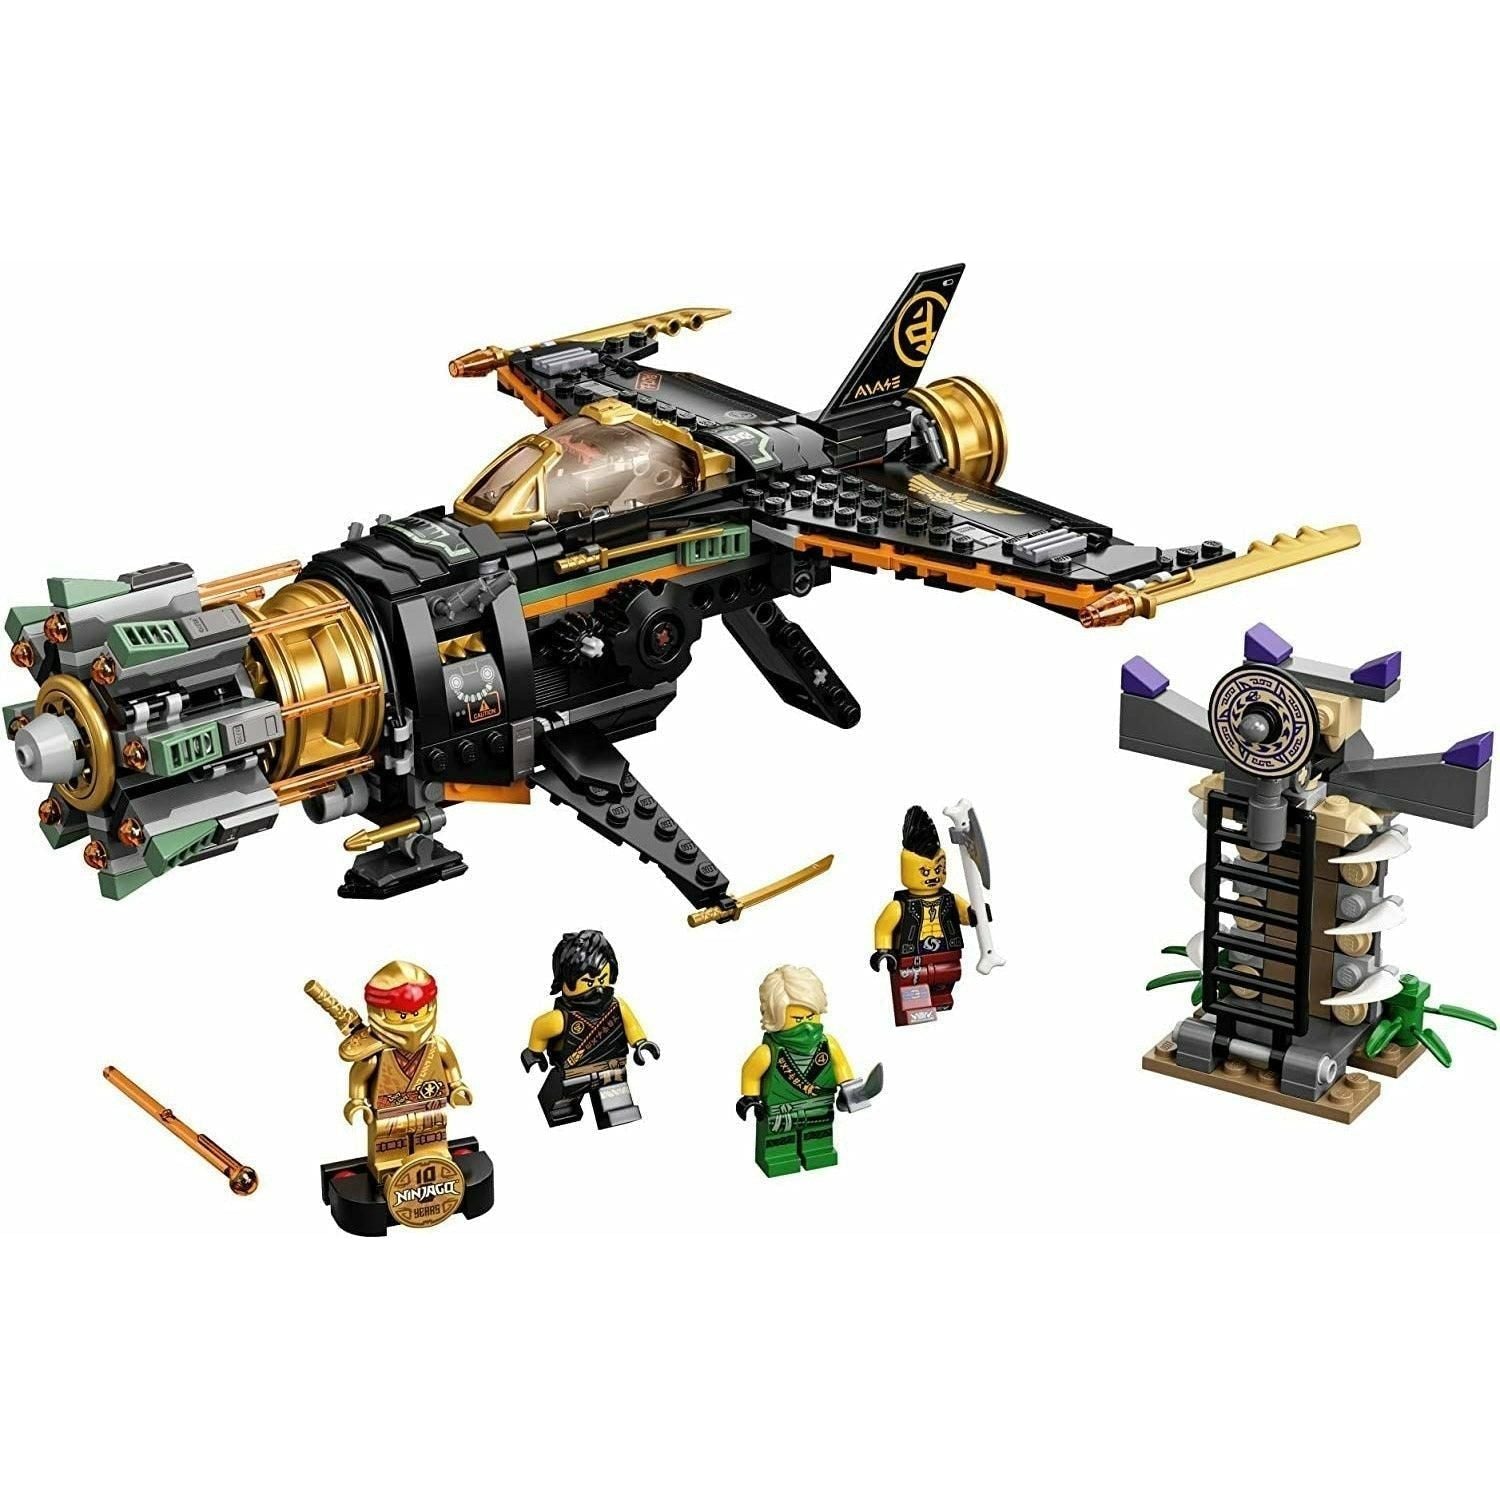 LEGO NINJAGO Legacy Boulder Blaster 71736 Airplane Toy Featuring Collectible Figurines (449 Pieces) - BumbleToys - 8+ Years, 8-13 Years, Boys, LEGO, Ninjago, OXE, Pre-Order